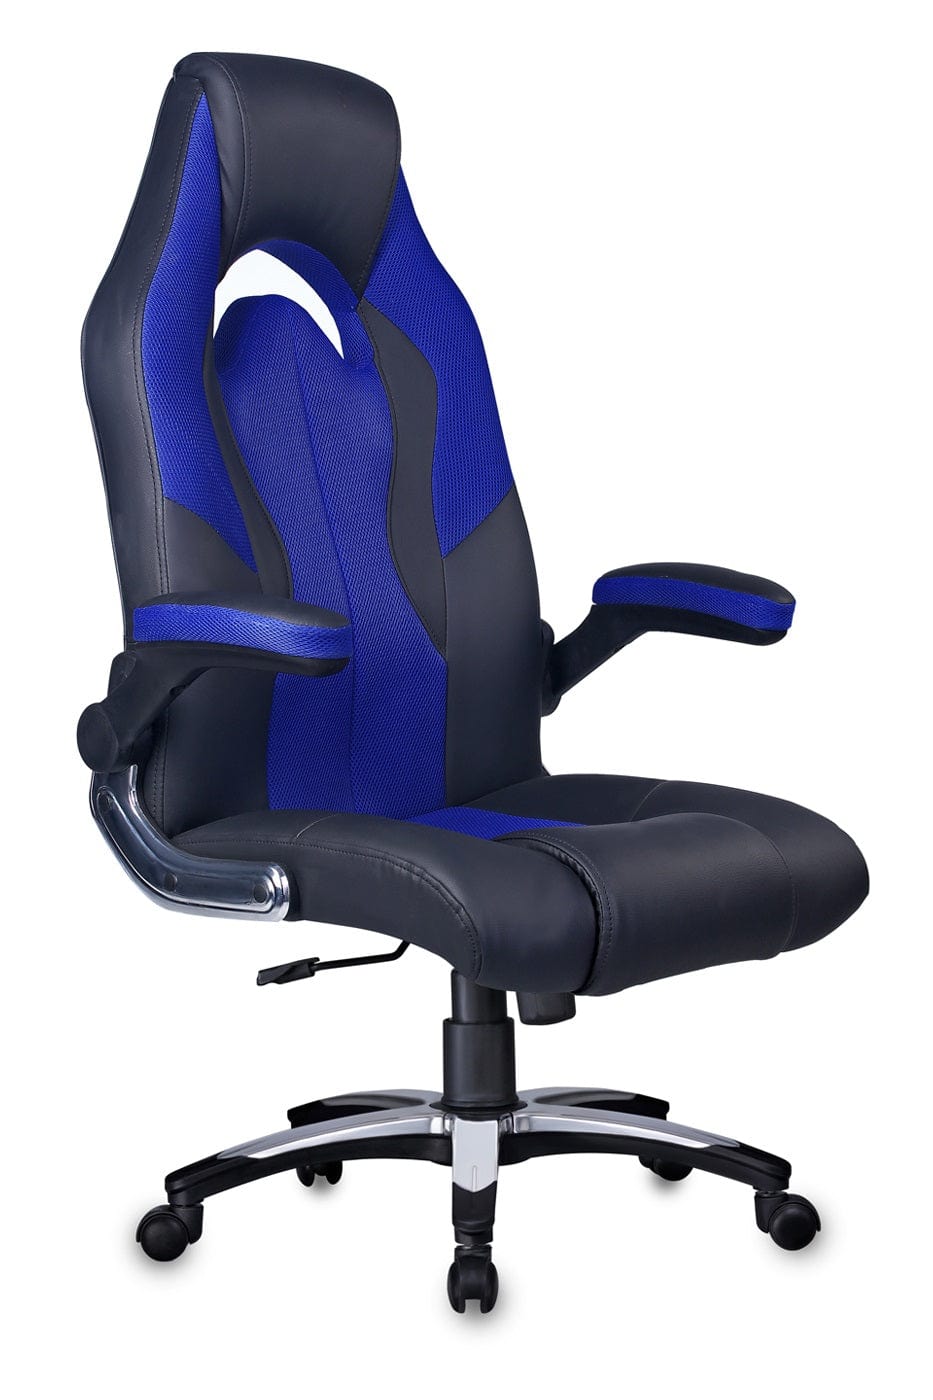 Stylish Gaming chair in Black/Blue